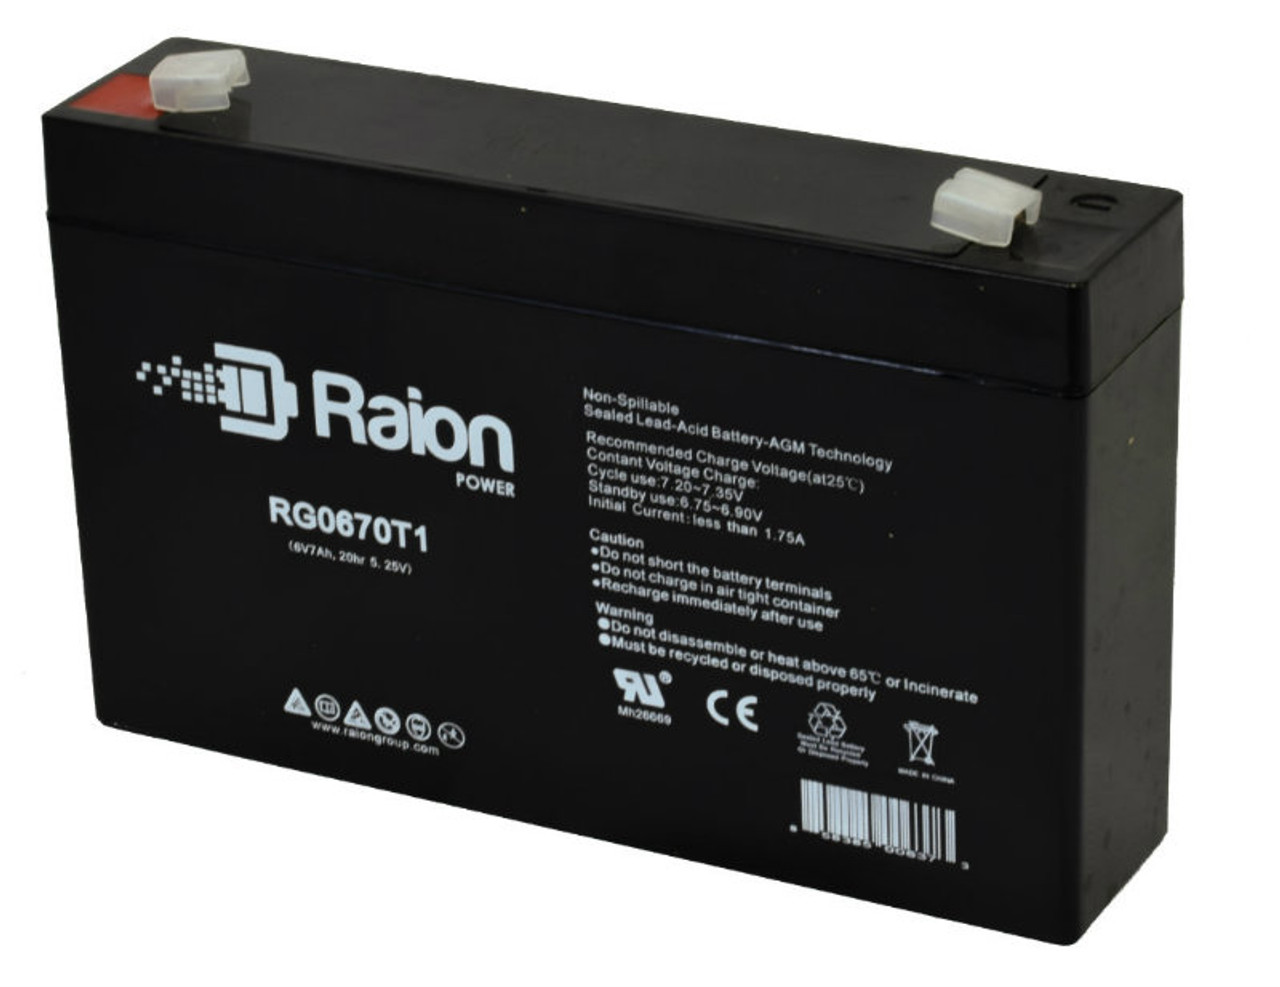 Raion Power RG0670T1 6V 7Ah Replacement Emergency Lighting Battery for Technacell EP665